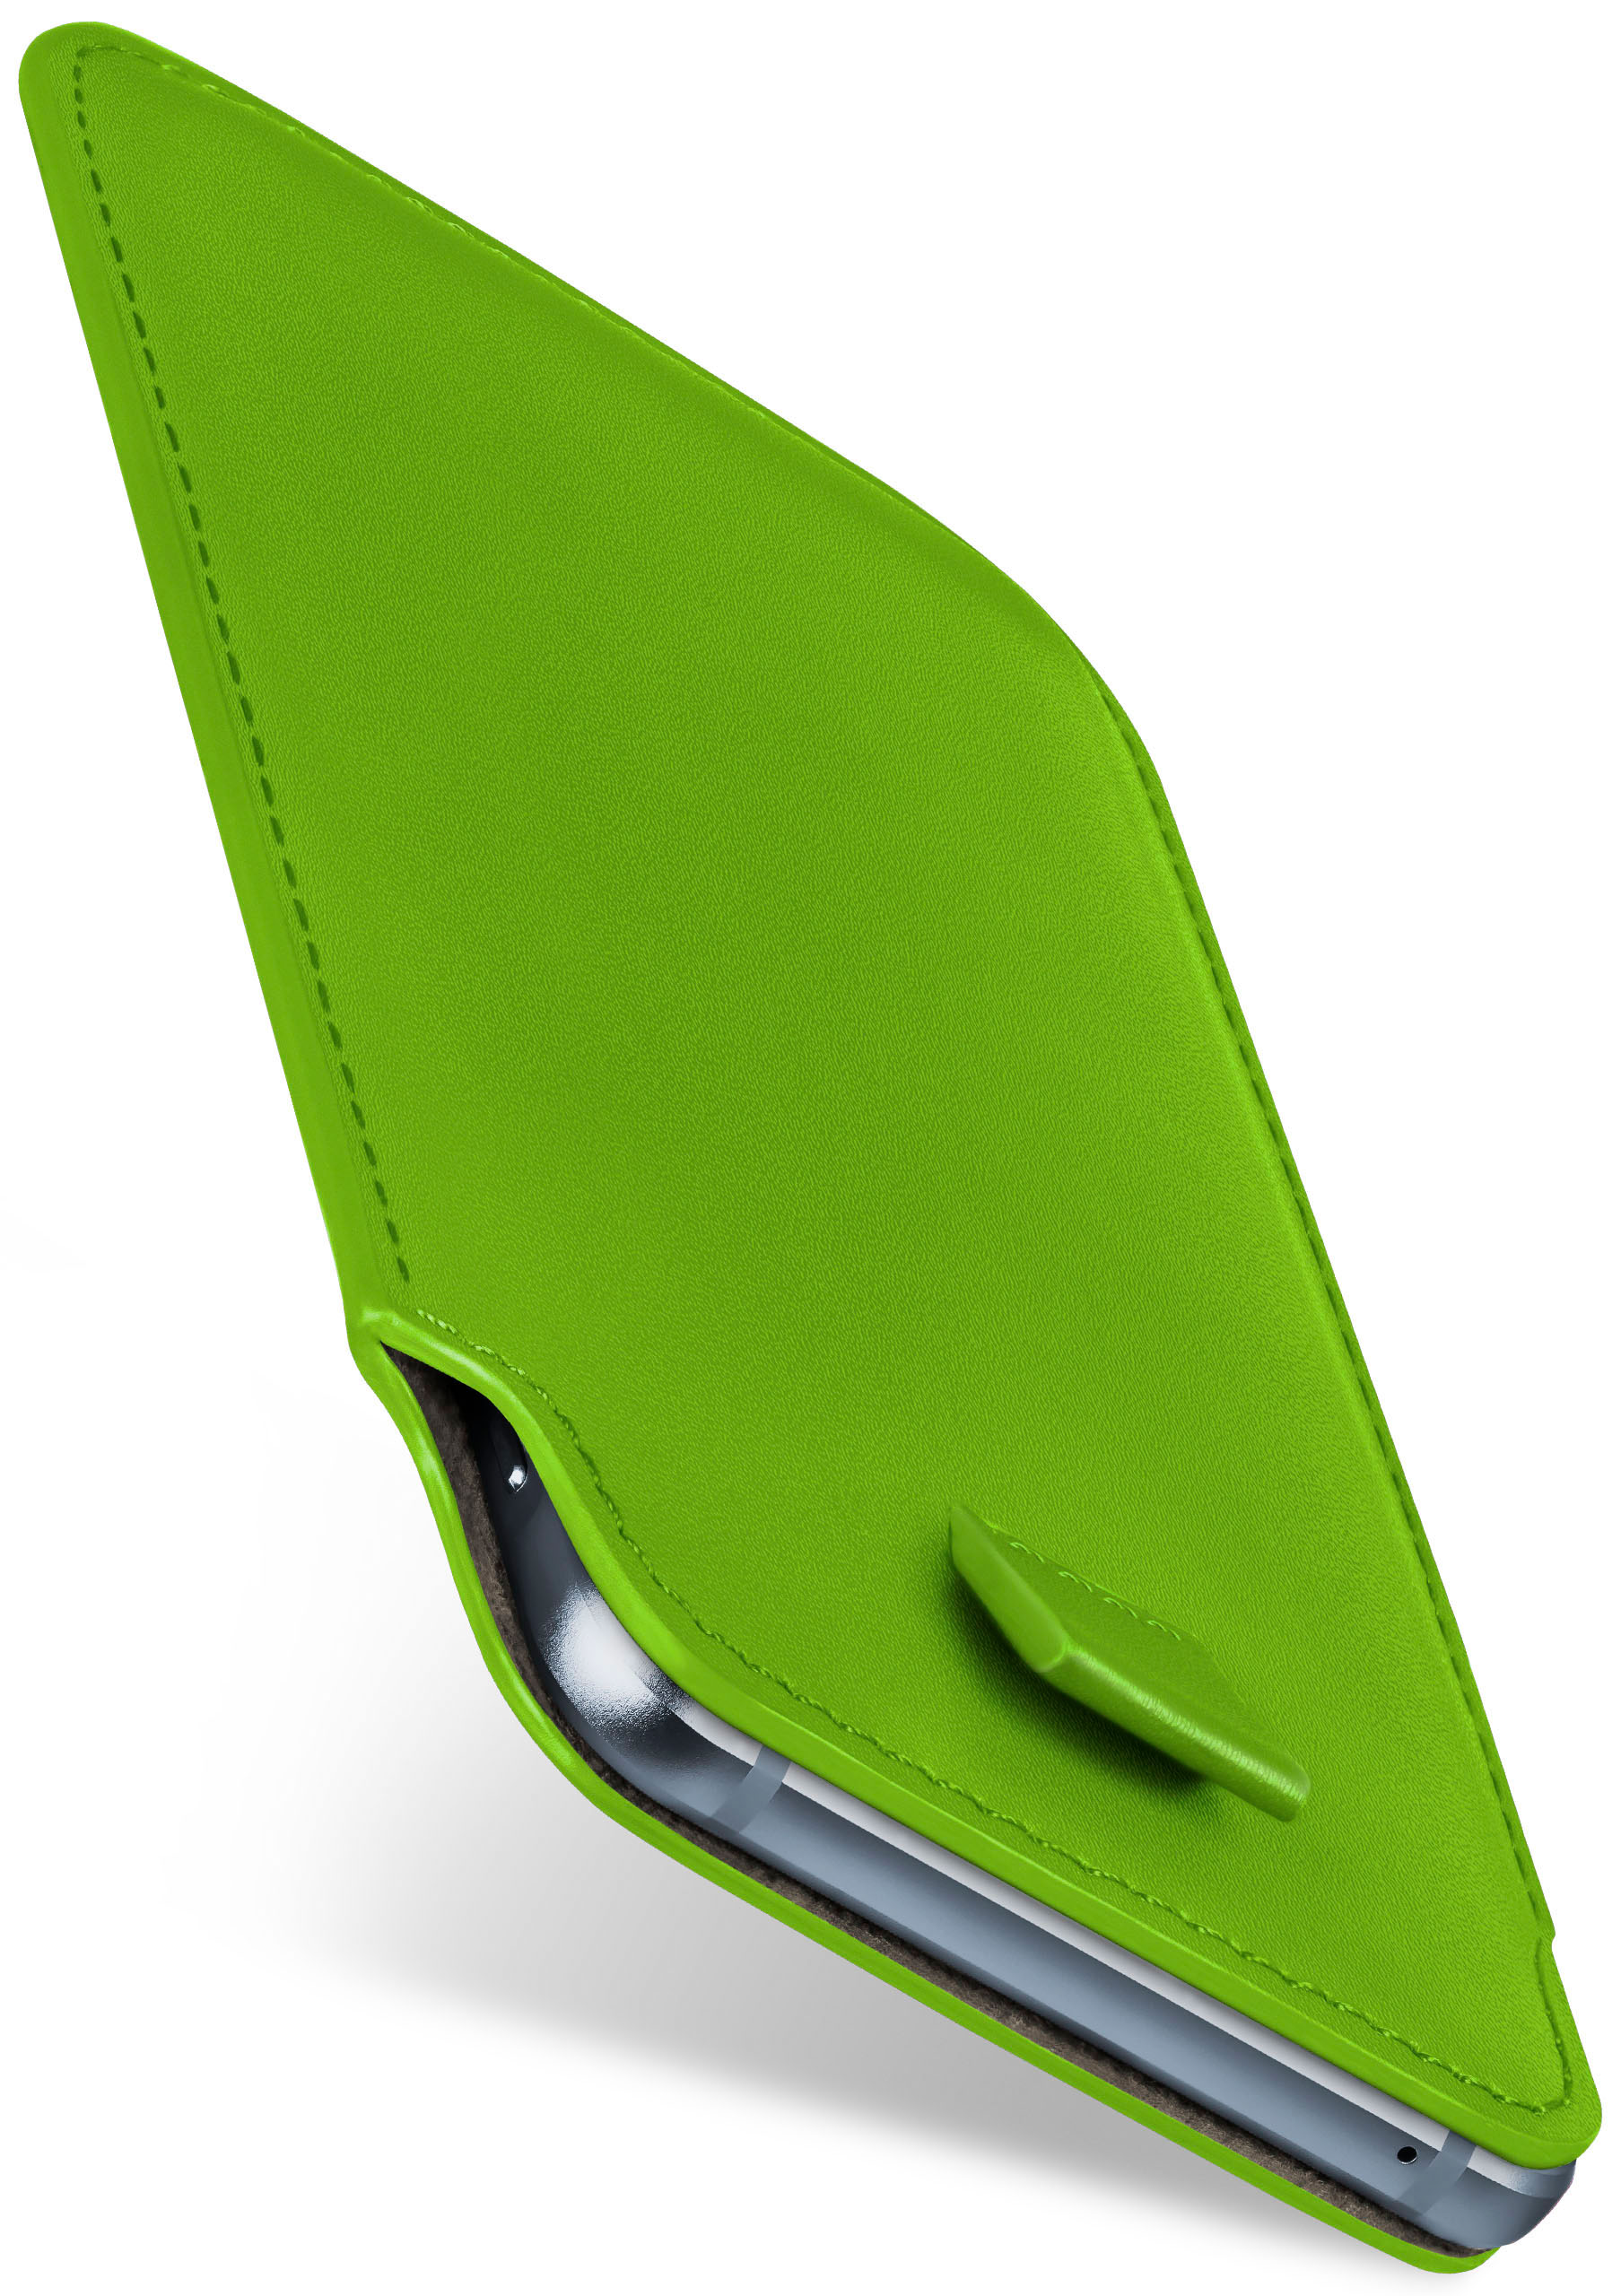 MOEX Slide XS Cover, Lime-Green iPhone Case, Apple, Max, Full